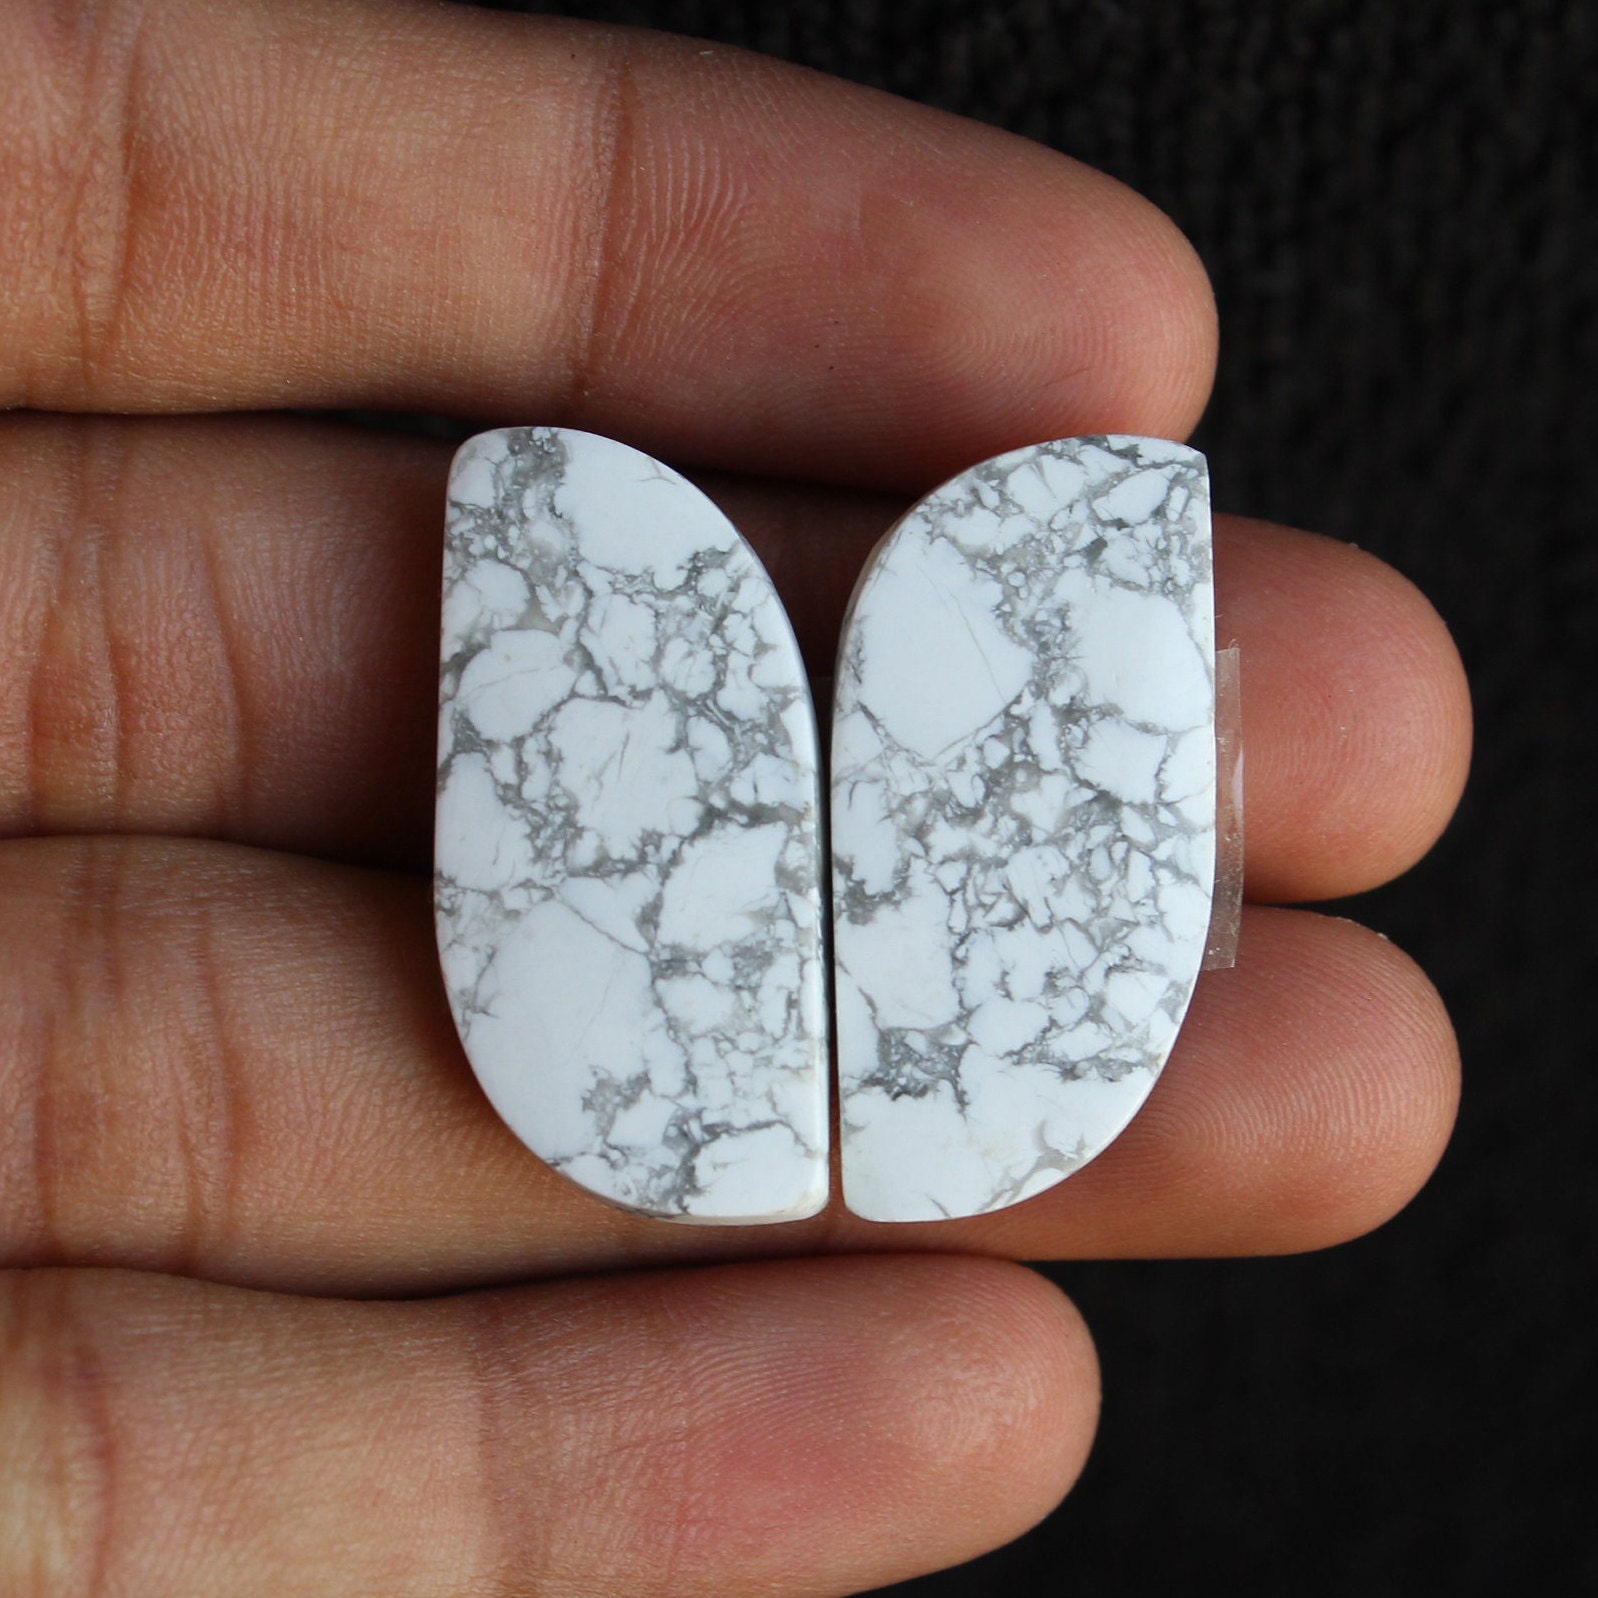 Unique Howlite Fancy Shape Cabochon Matching Pair Gemstone For Earrings Making, Free Drilling Available 17X16X4 mm